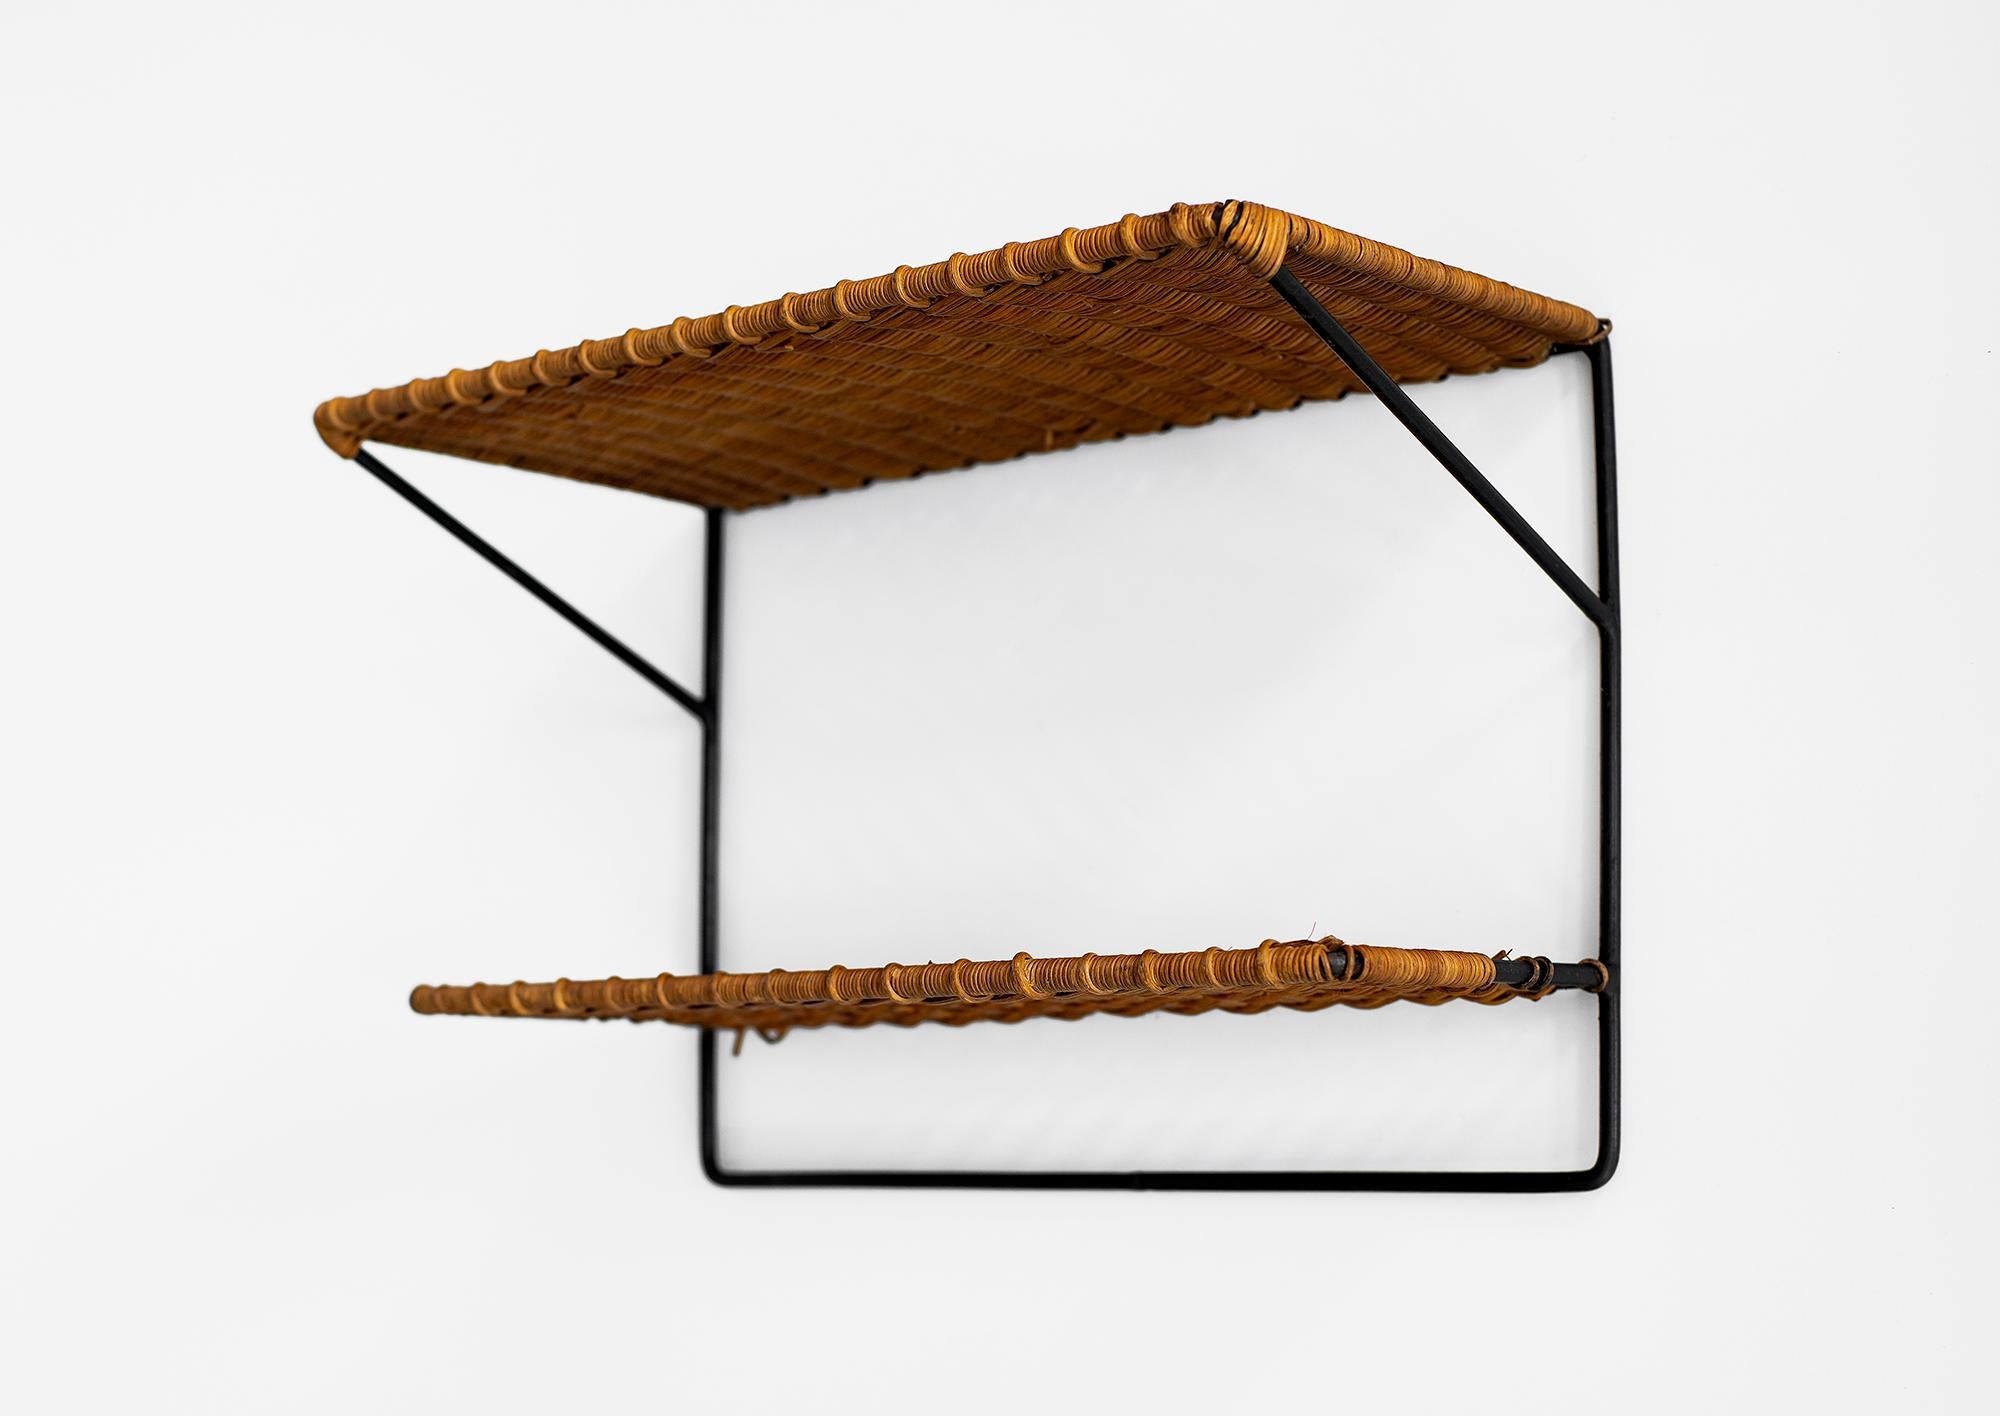 French wicker and iron double shelf.
Perfect to add character and function to any space.